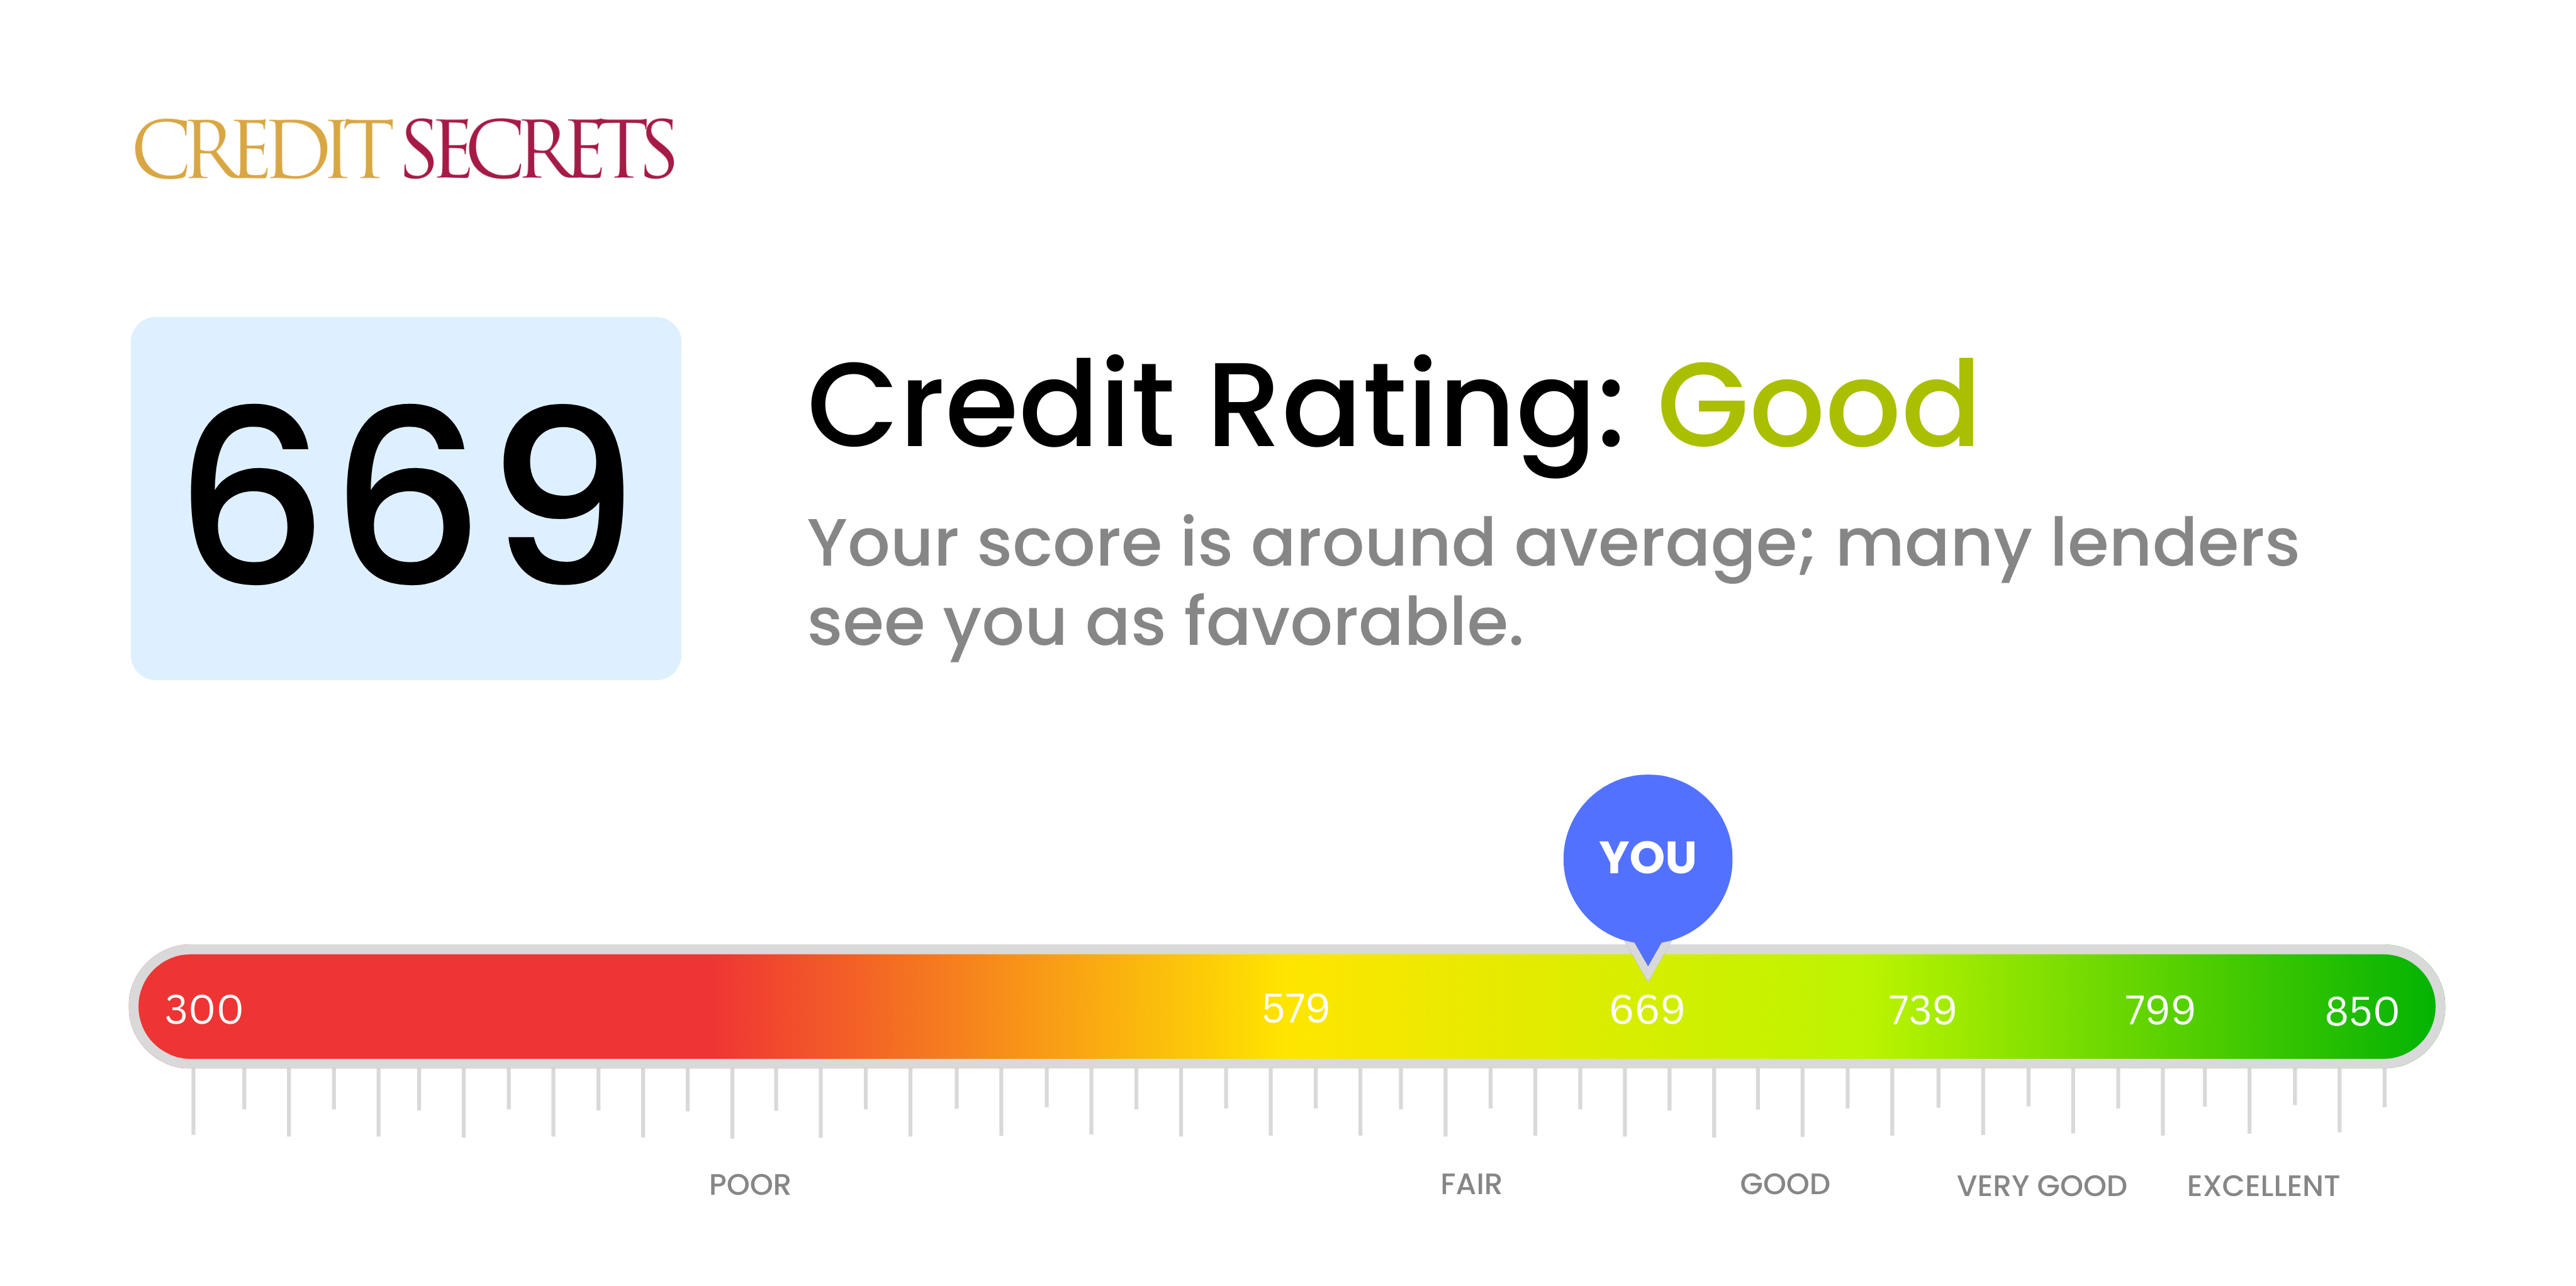 Is 669 a good credit score?